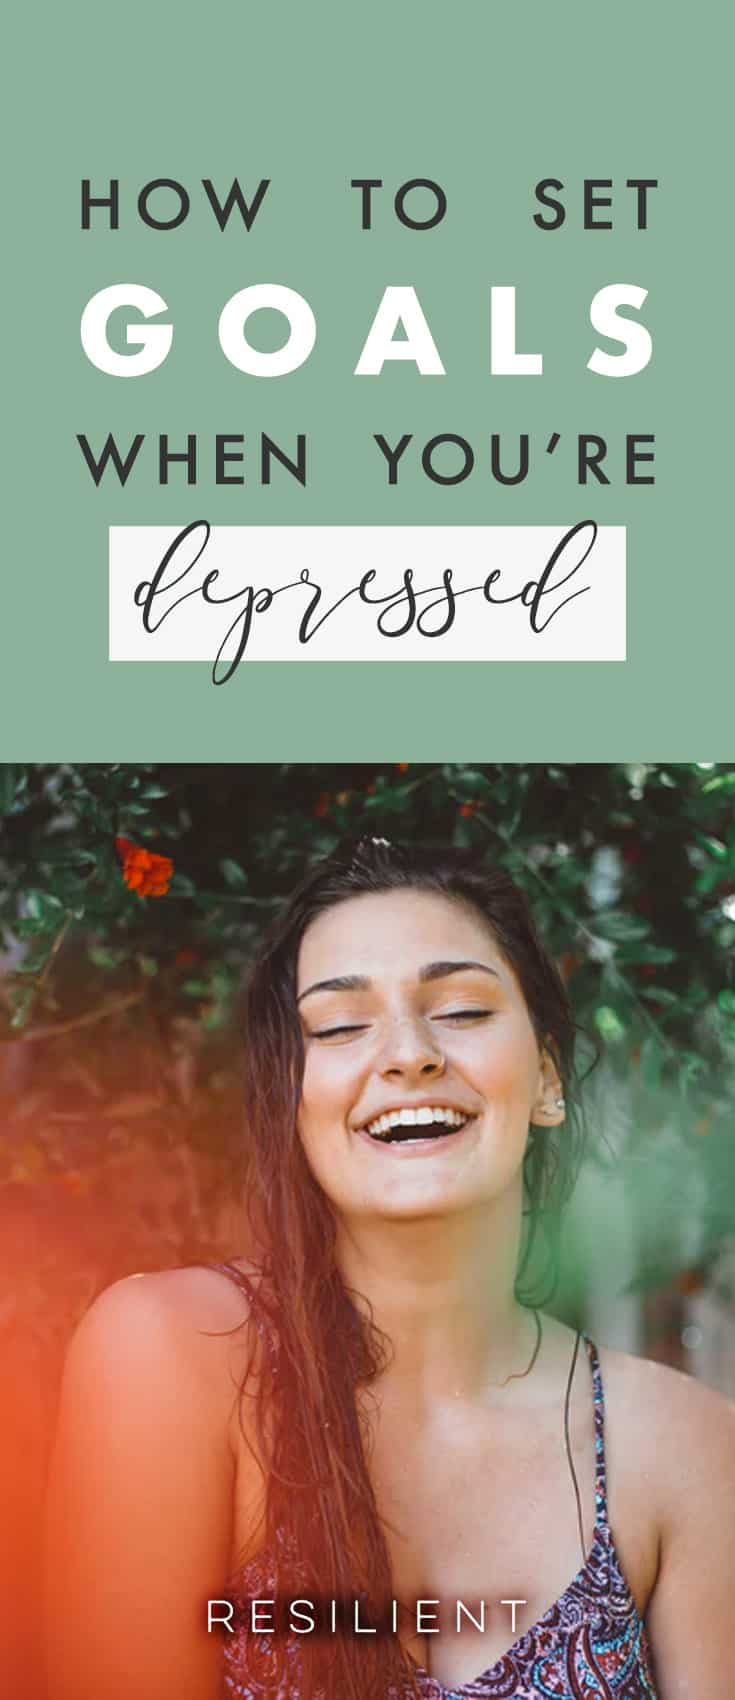 Setting goals when you're depressed can sometimes feel overwhelming and discouraging. Instead, here are my tips for a better way to set goals when you're depressed. Here's how to set goals when you're depressed.